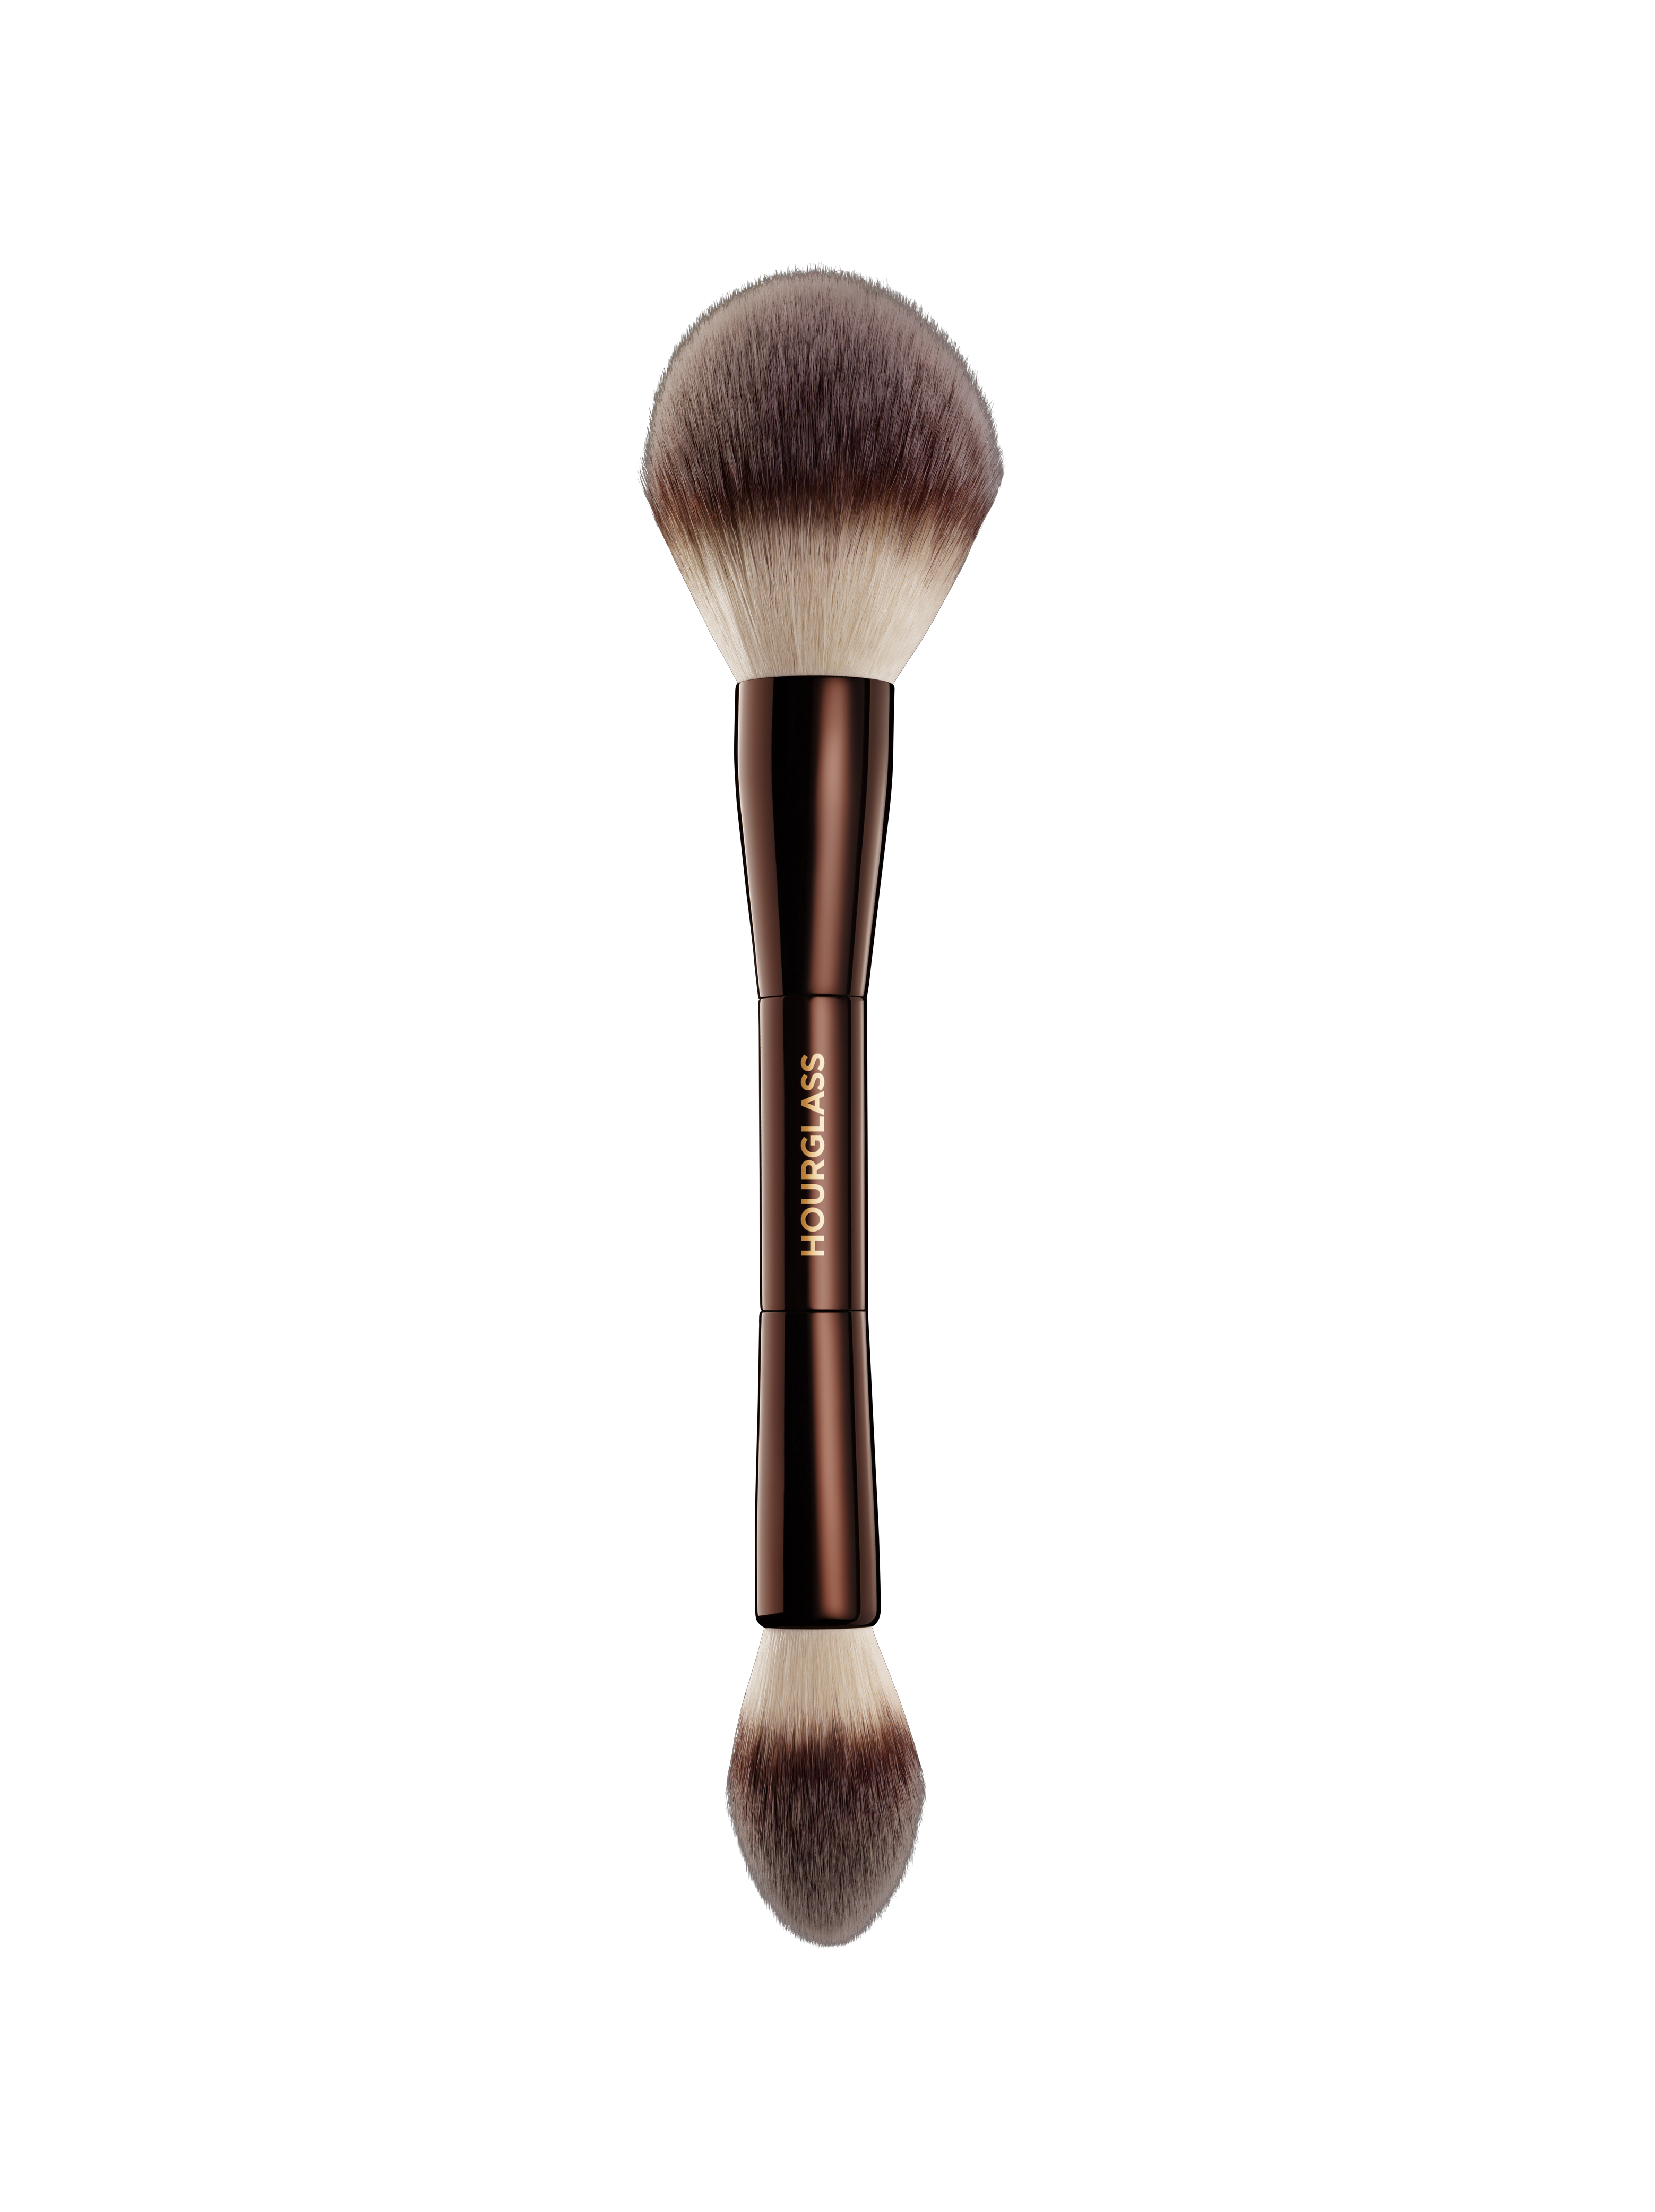 This fancy brush is selling out fast